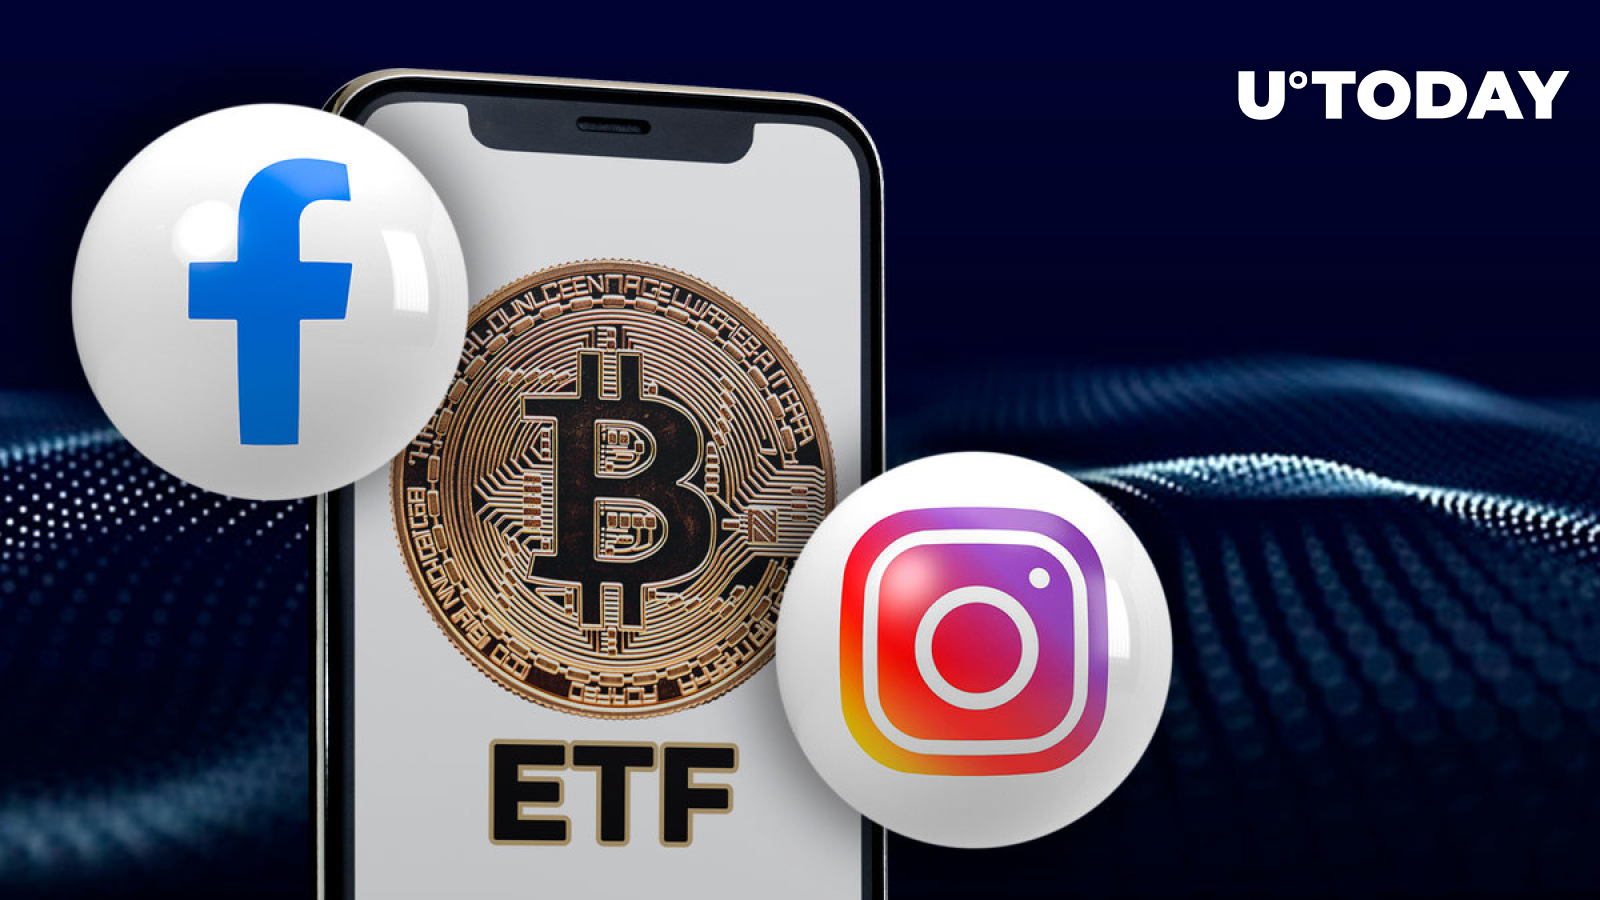 Bitcoin ETF Ads Might Appear on Facebook, Instagram, WSJ Says